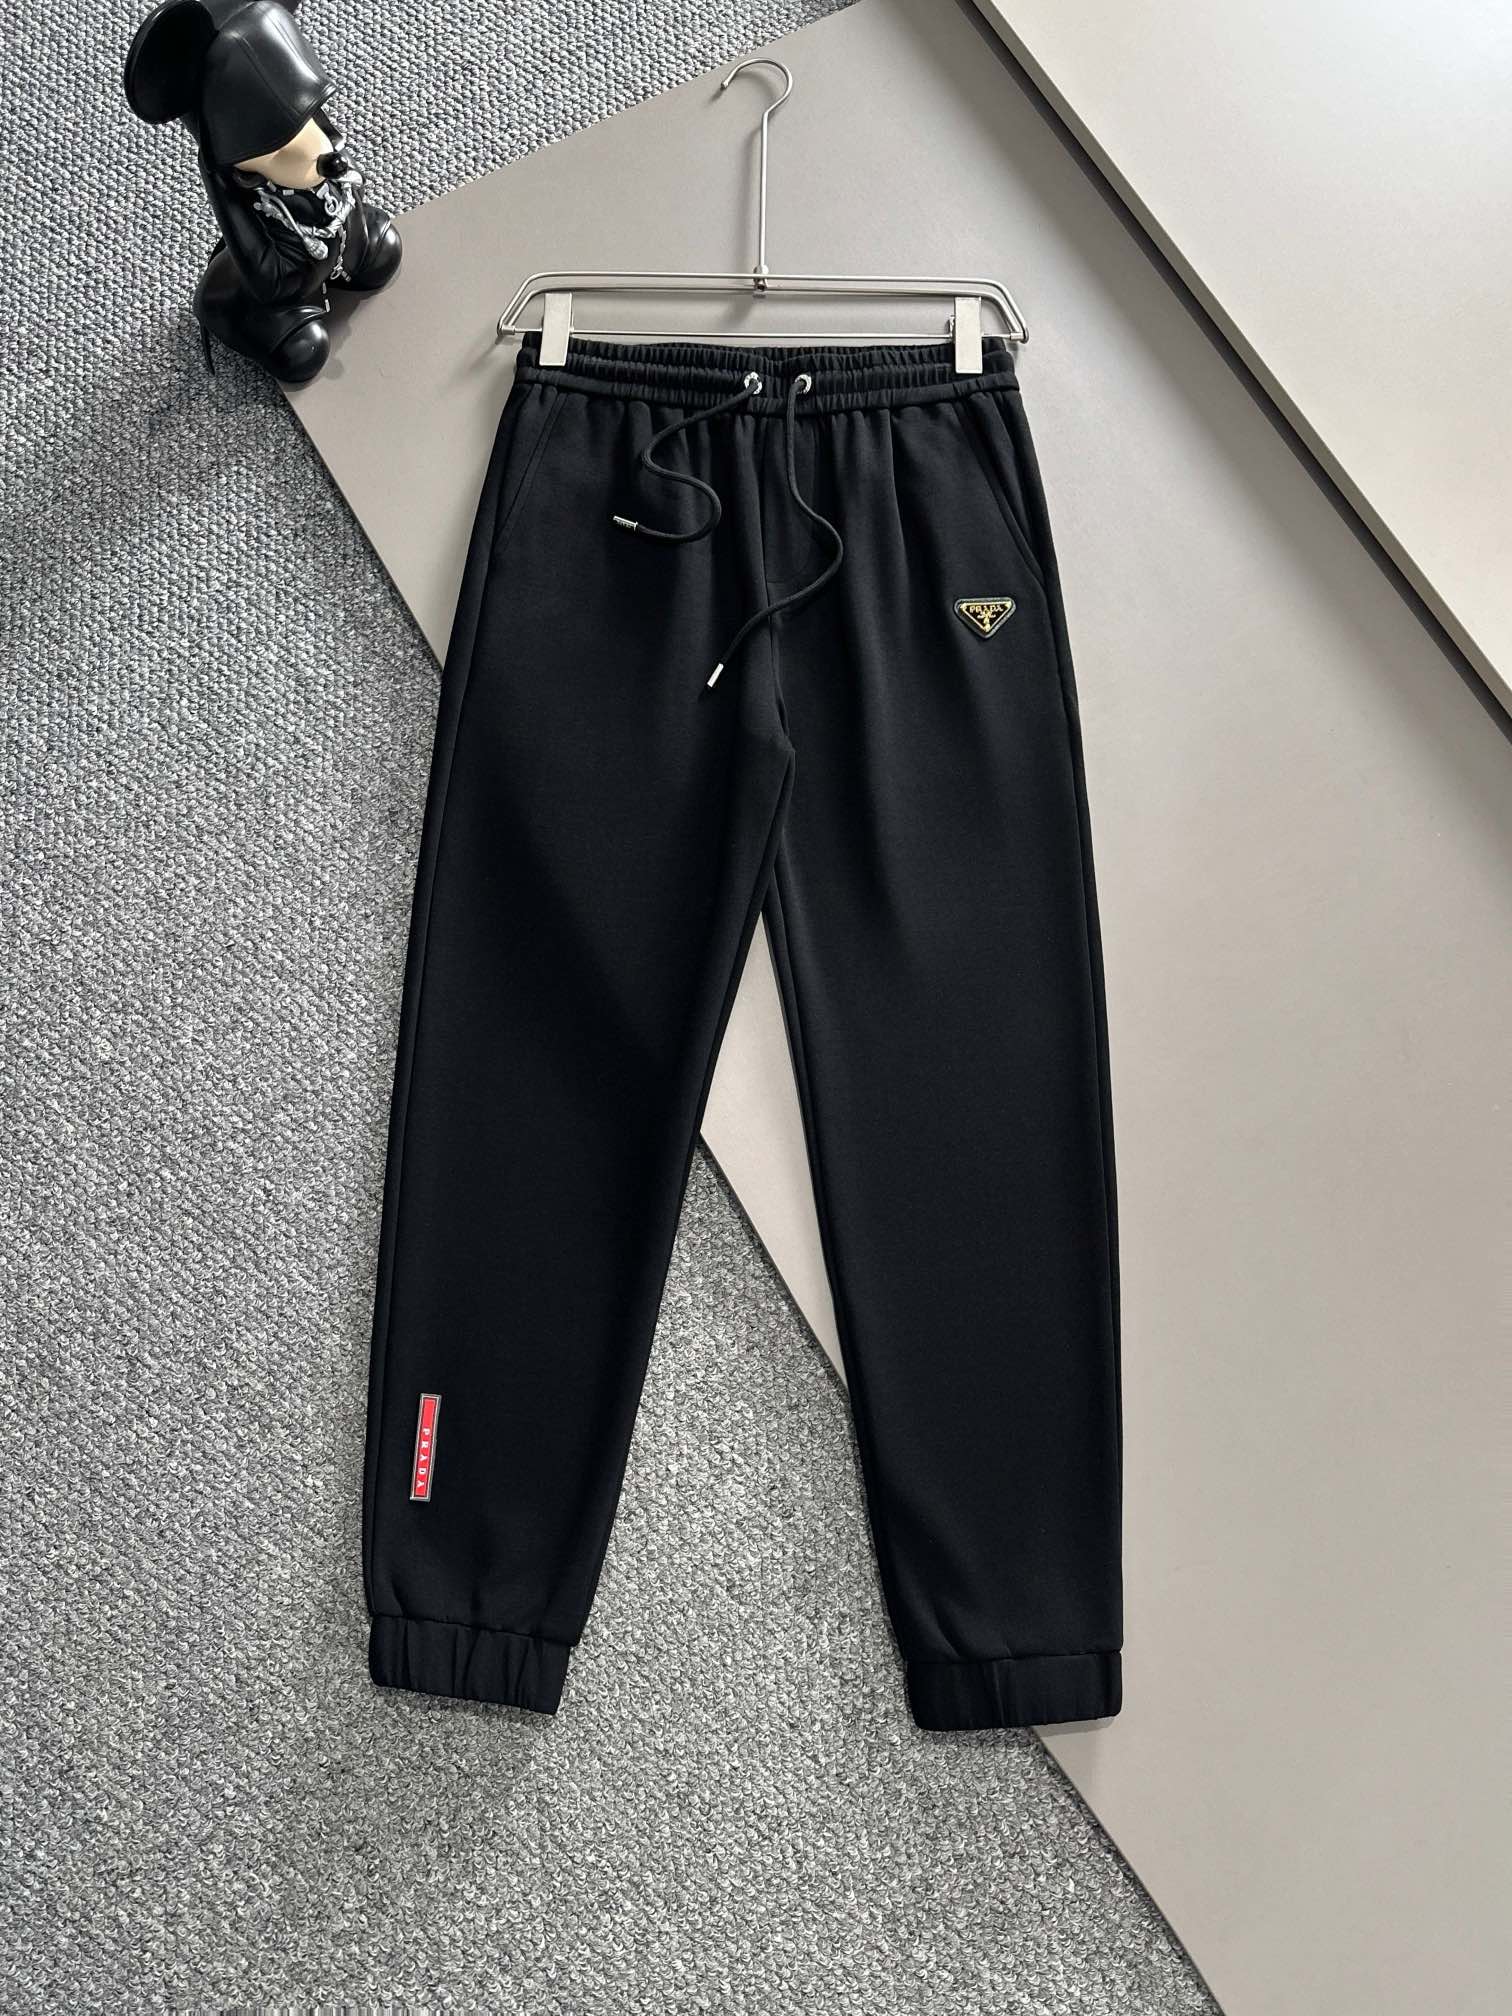 Prada Best
 Clothing Pants & Trousers Fall/Winter Collection Casual